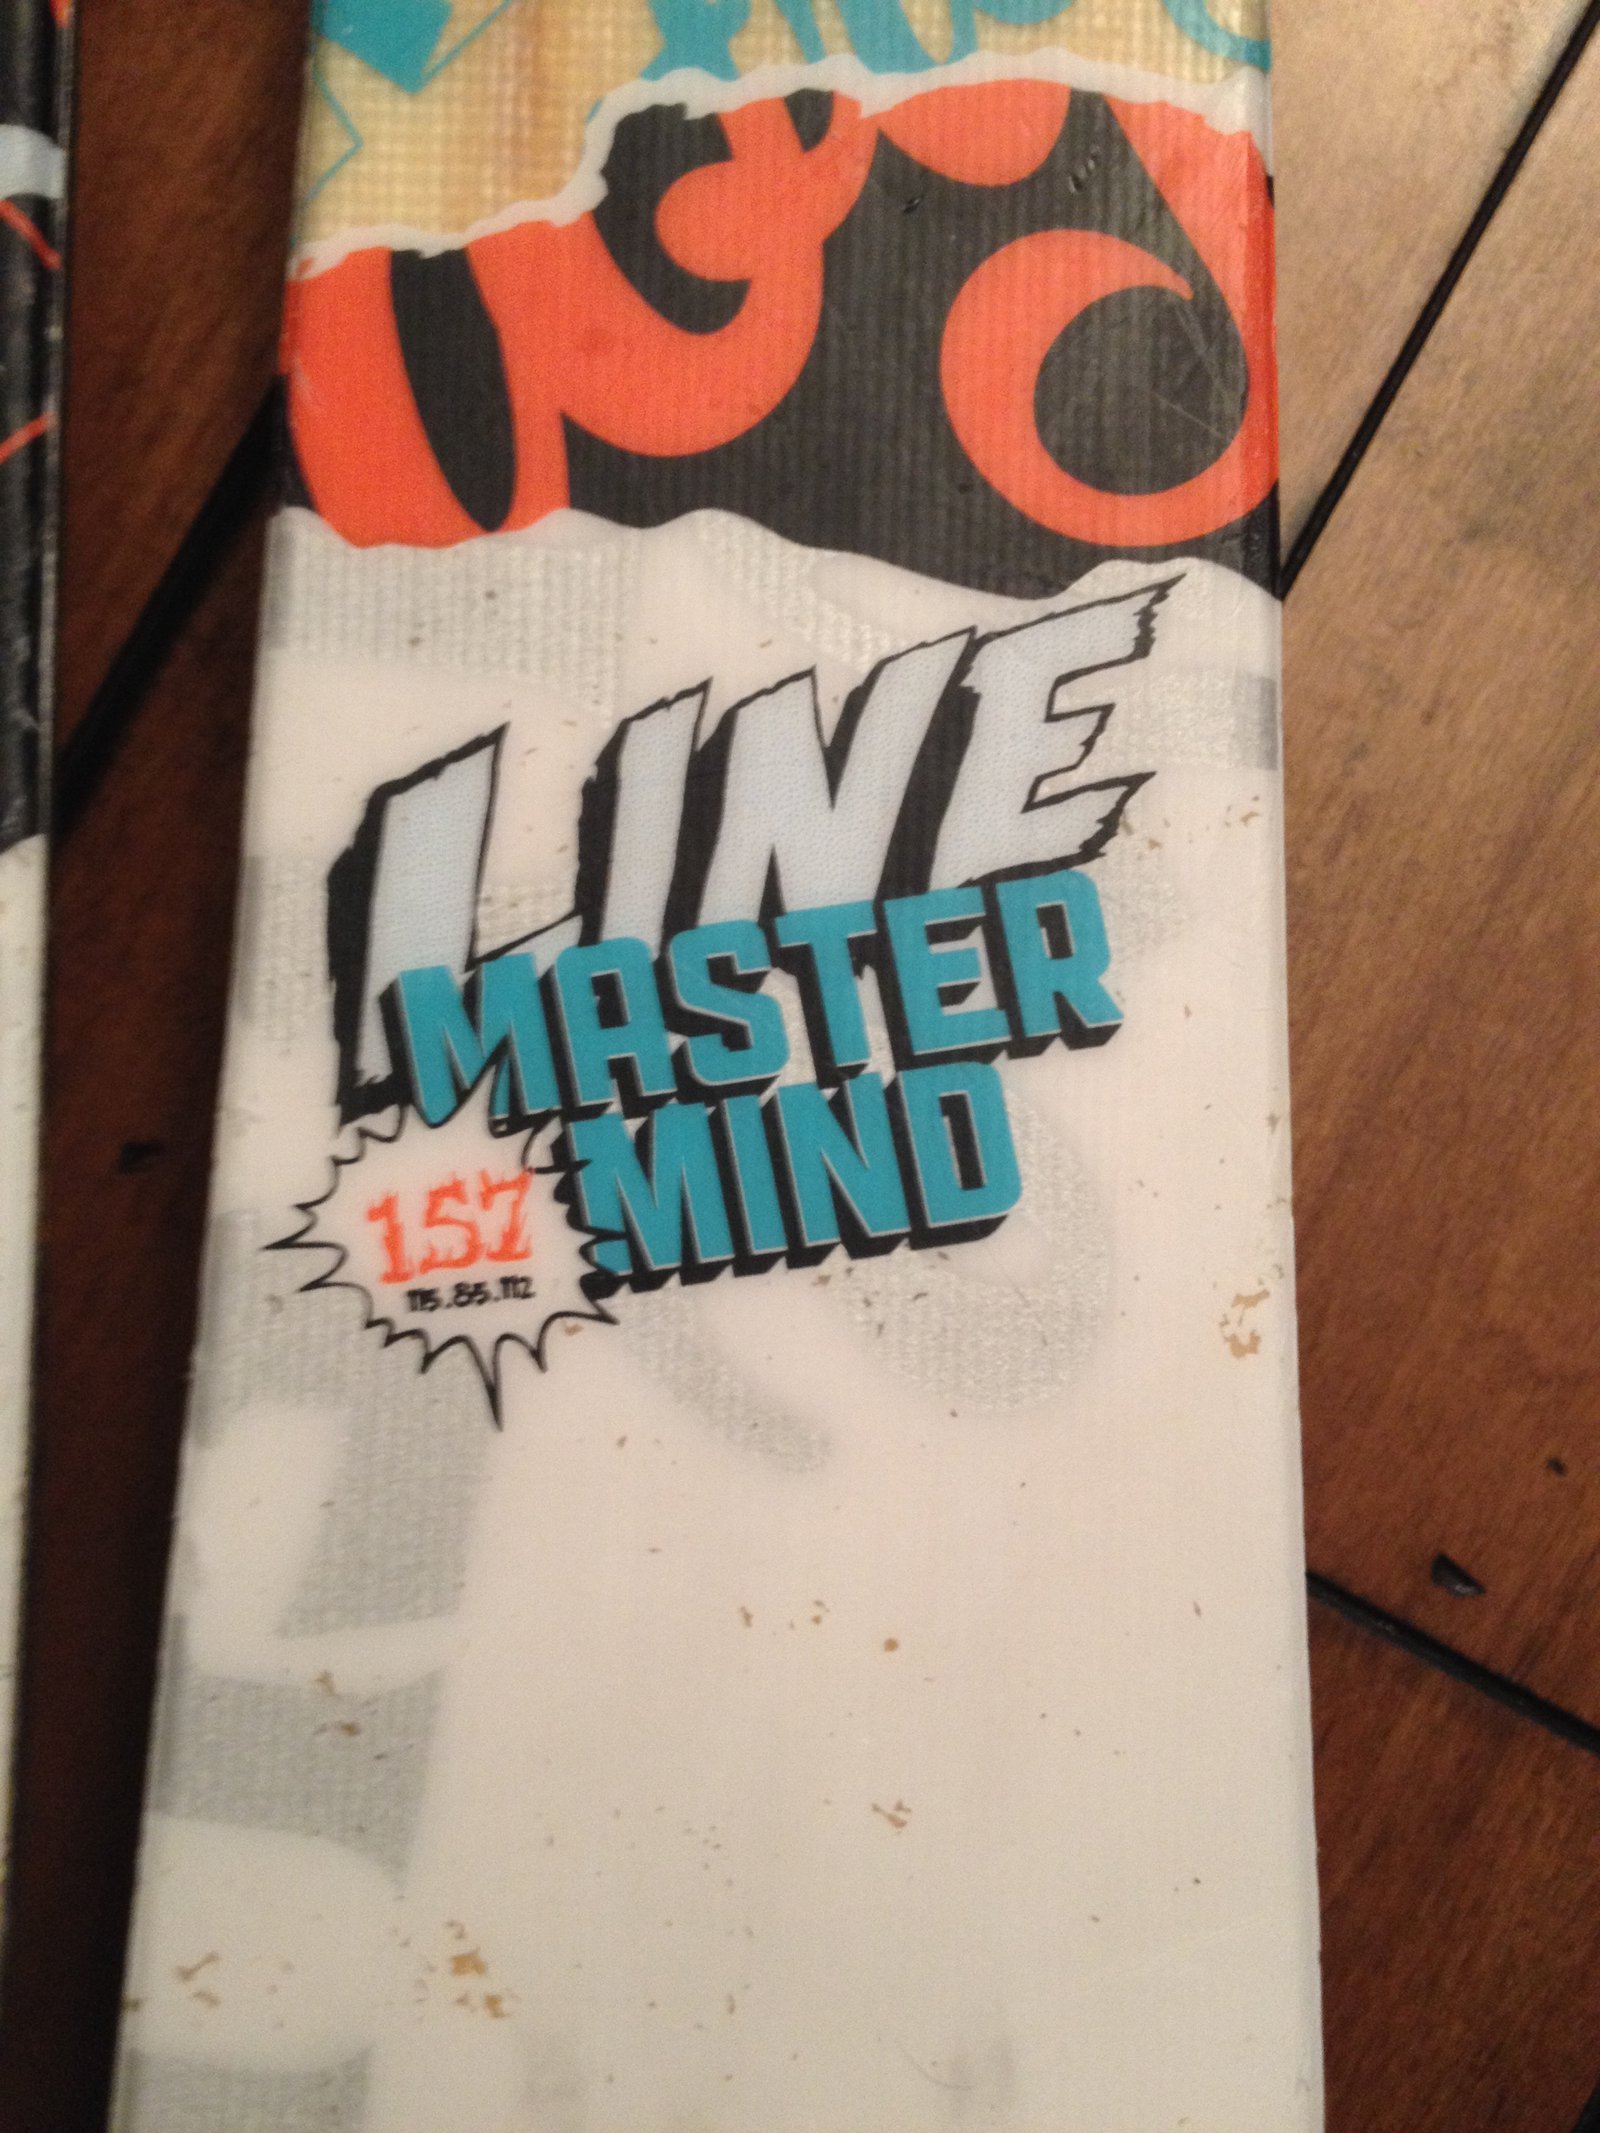  Pair of 2011/2012 Line Mastermind twin tip skis size 157